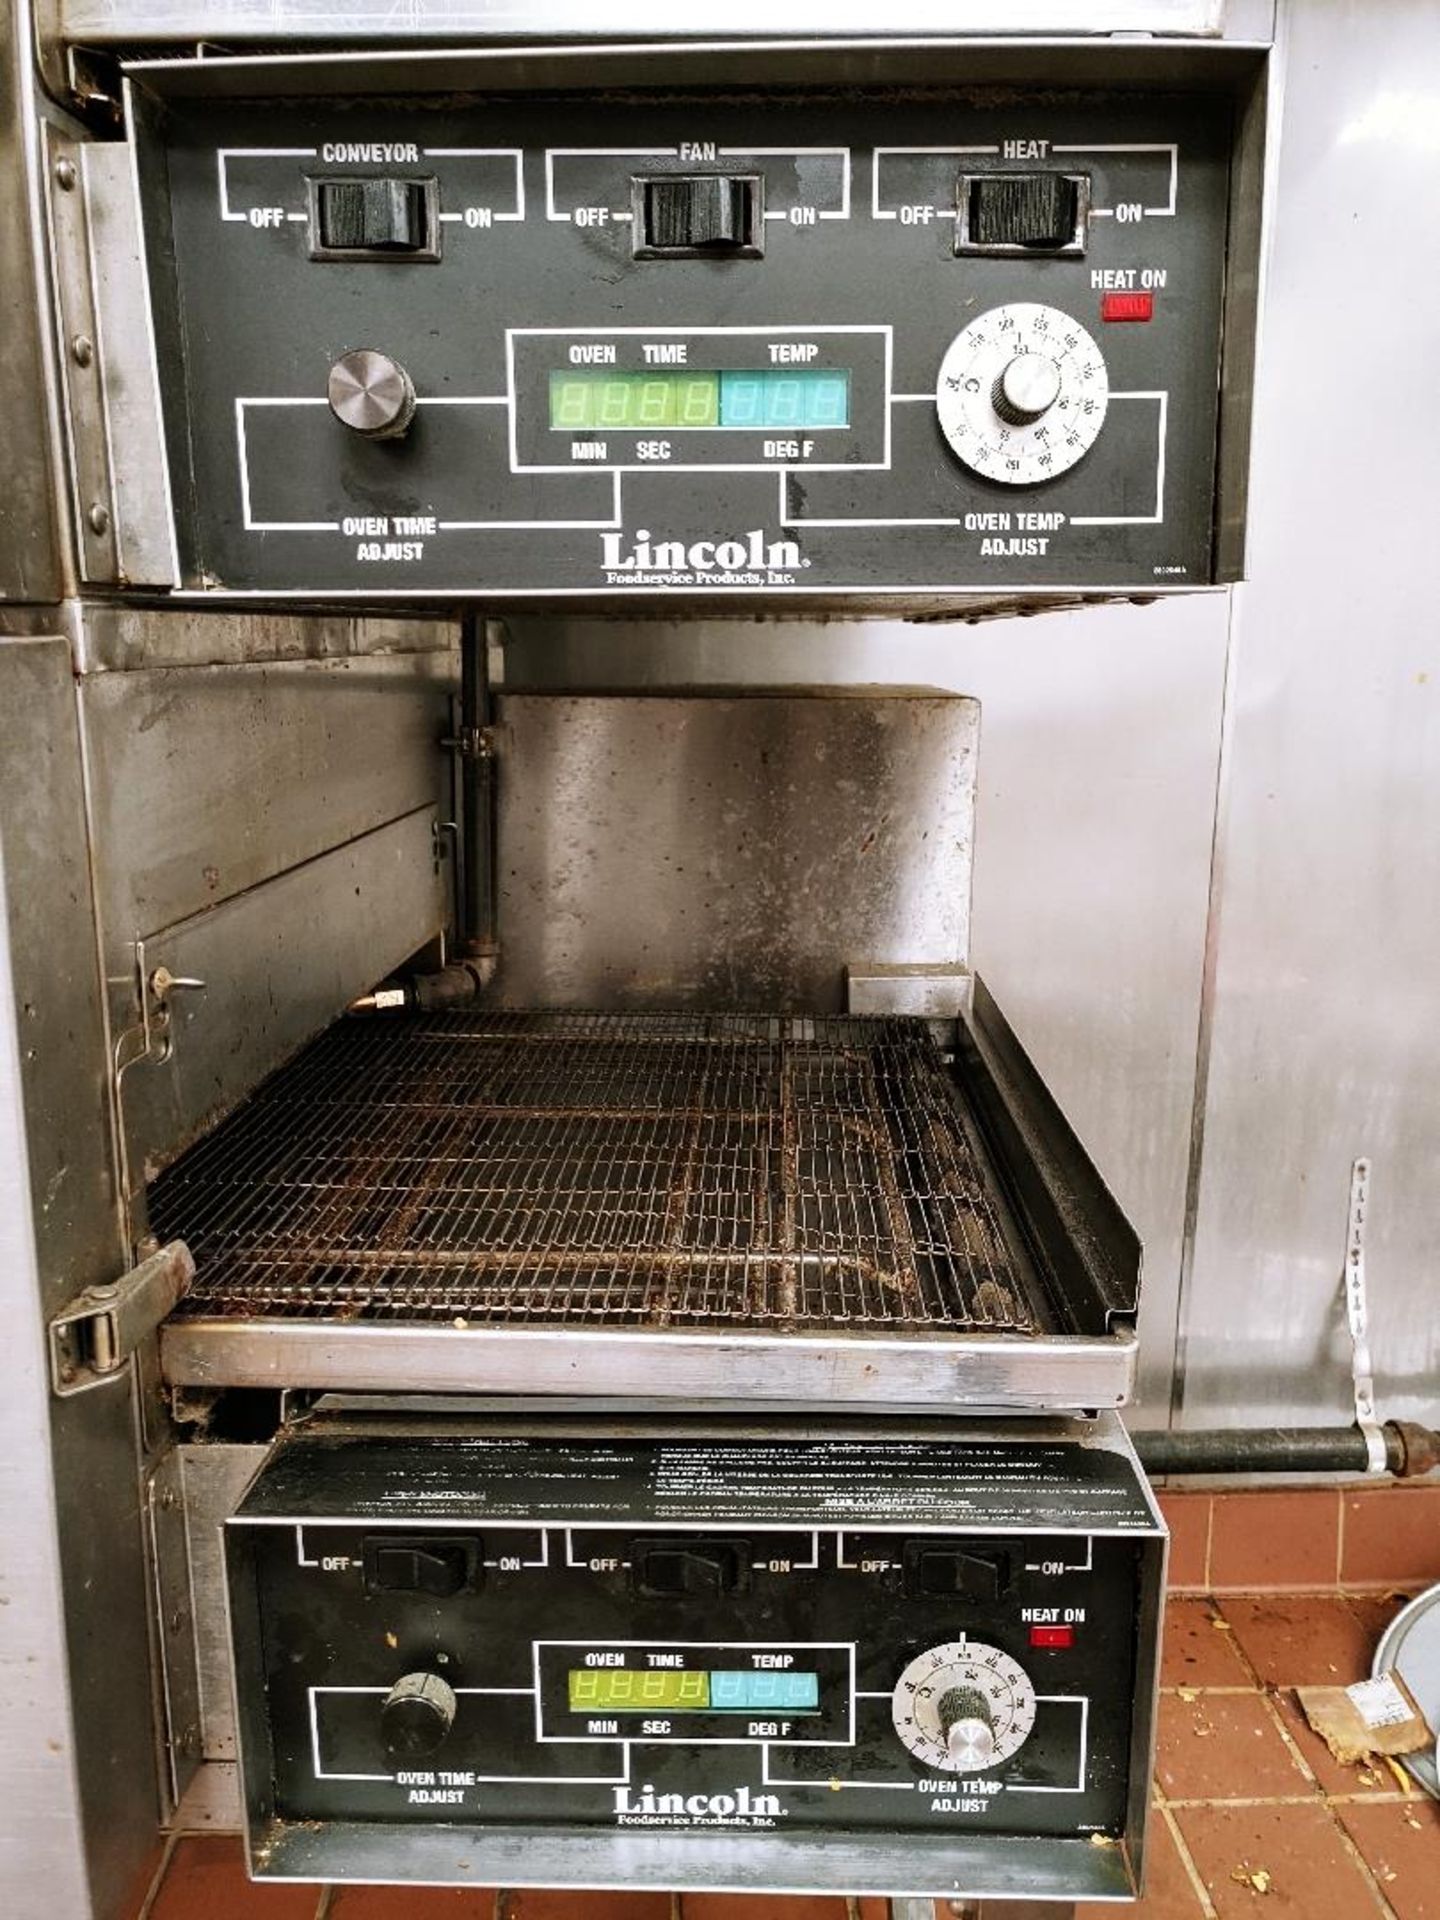 LINCOLN FOODSERVICE PRODUCTS INC. DUAL CONVEYOR PIZZA OVEN WITH DIGITAL CONTROL PANELS, MODEL 1162-0 - Image 4 of 5